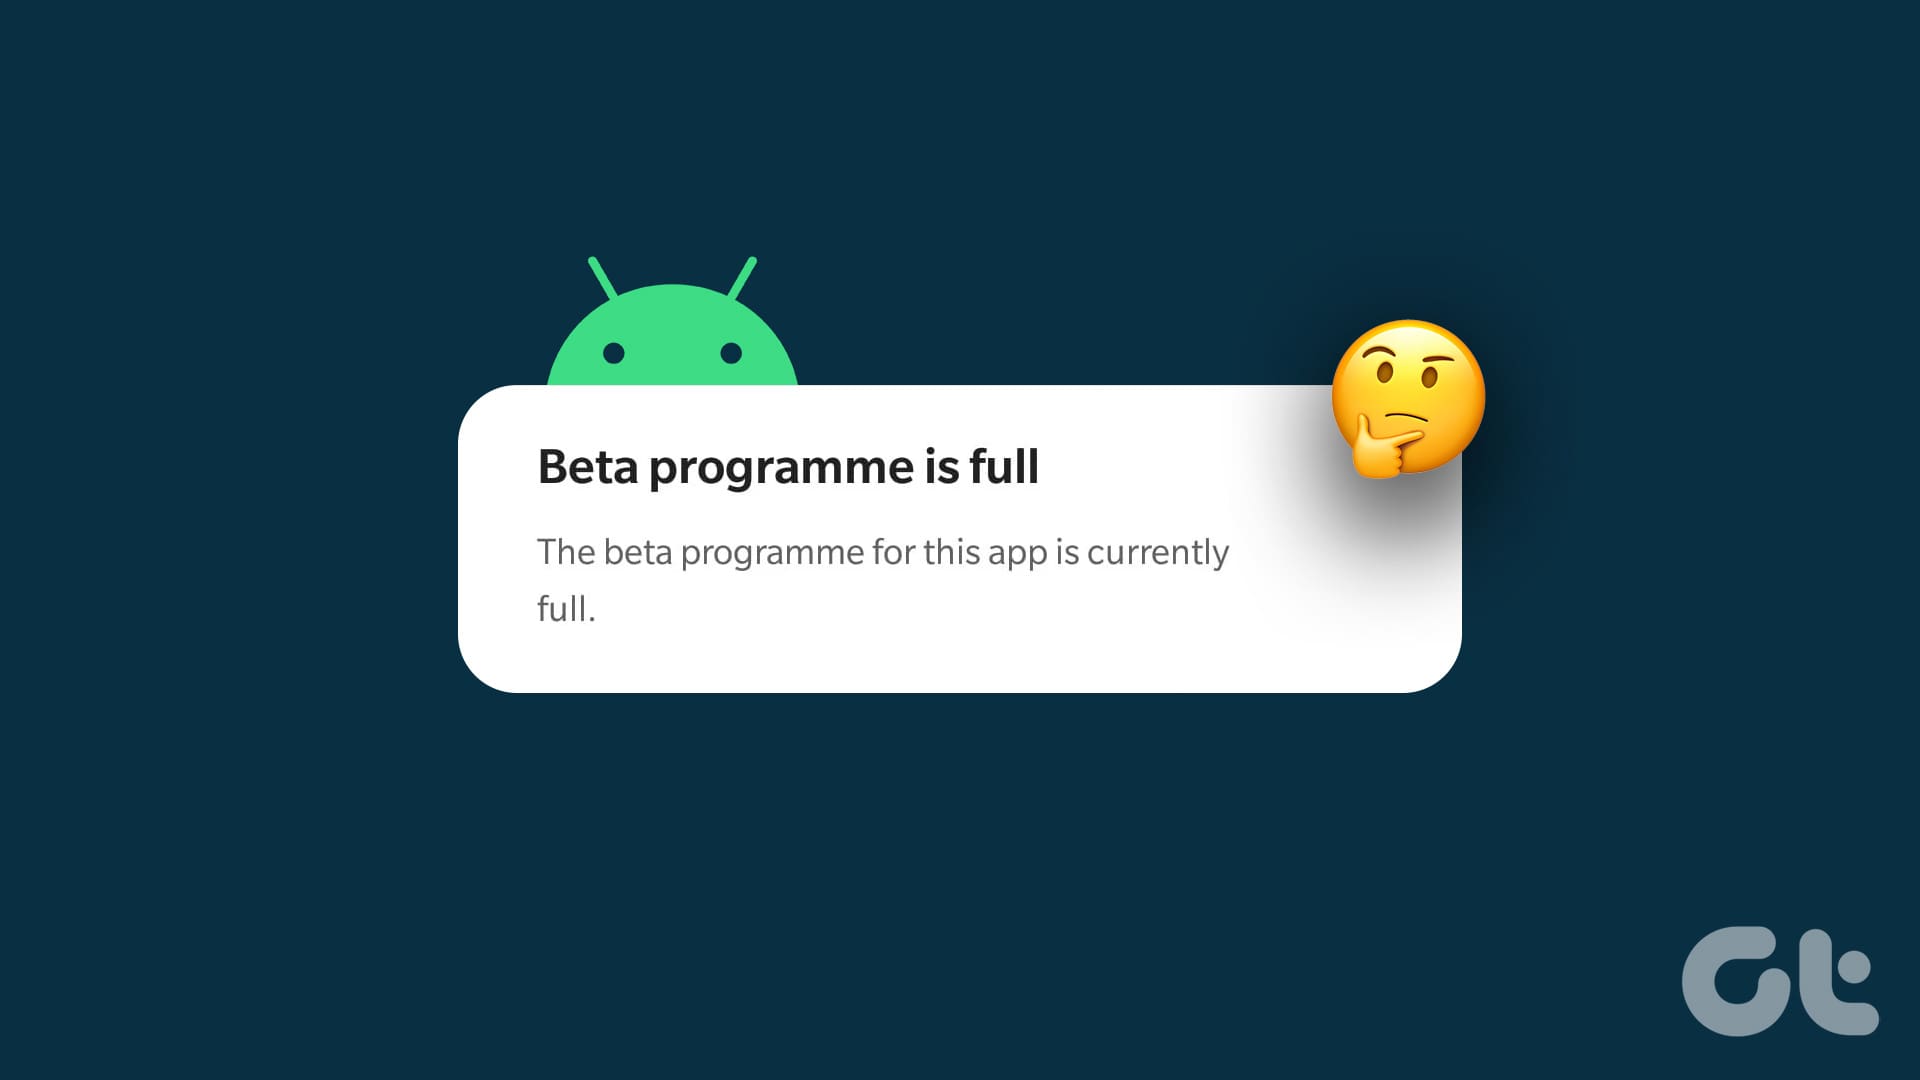 join Android app's beta program even if it's full